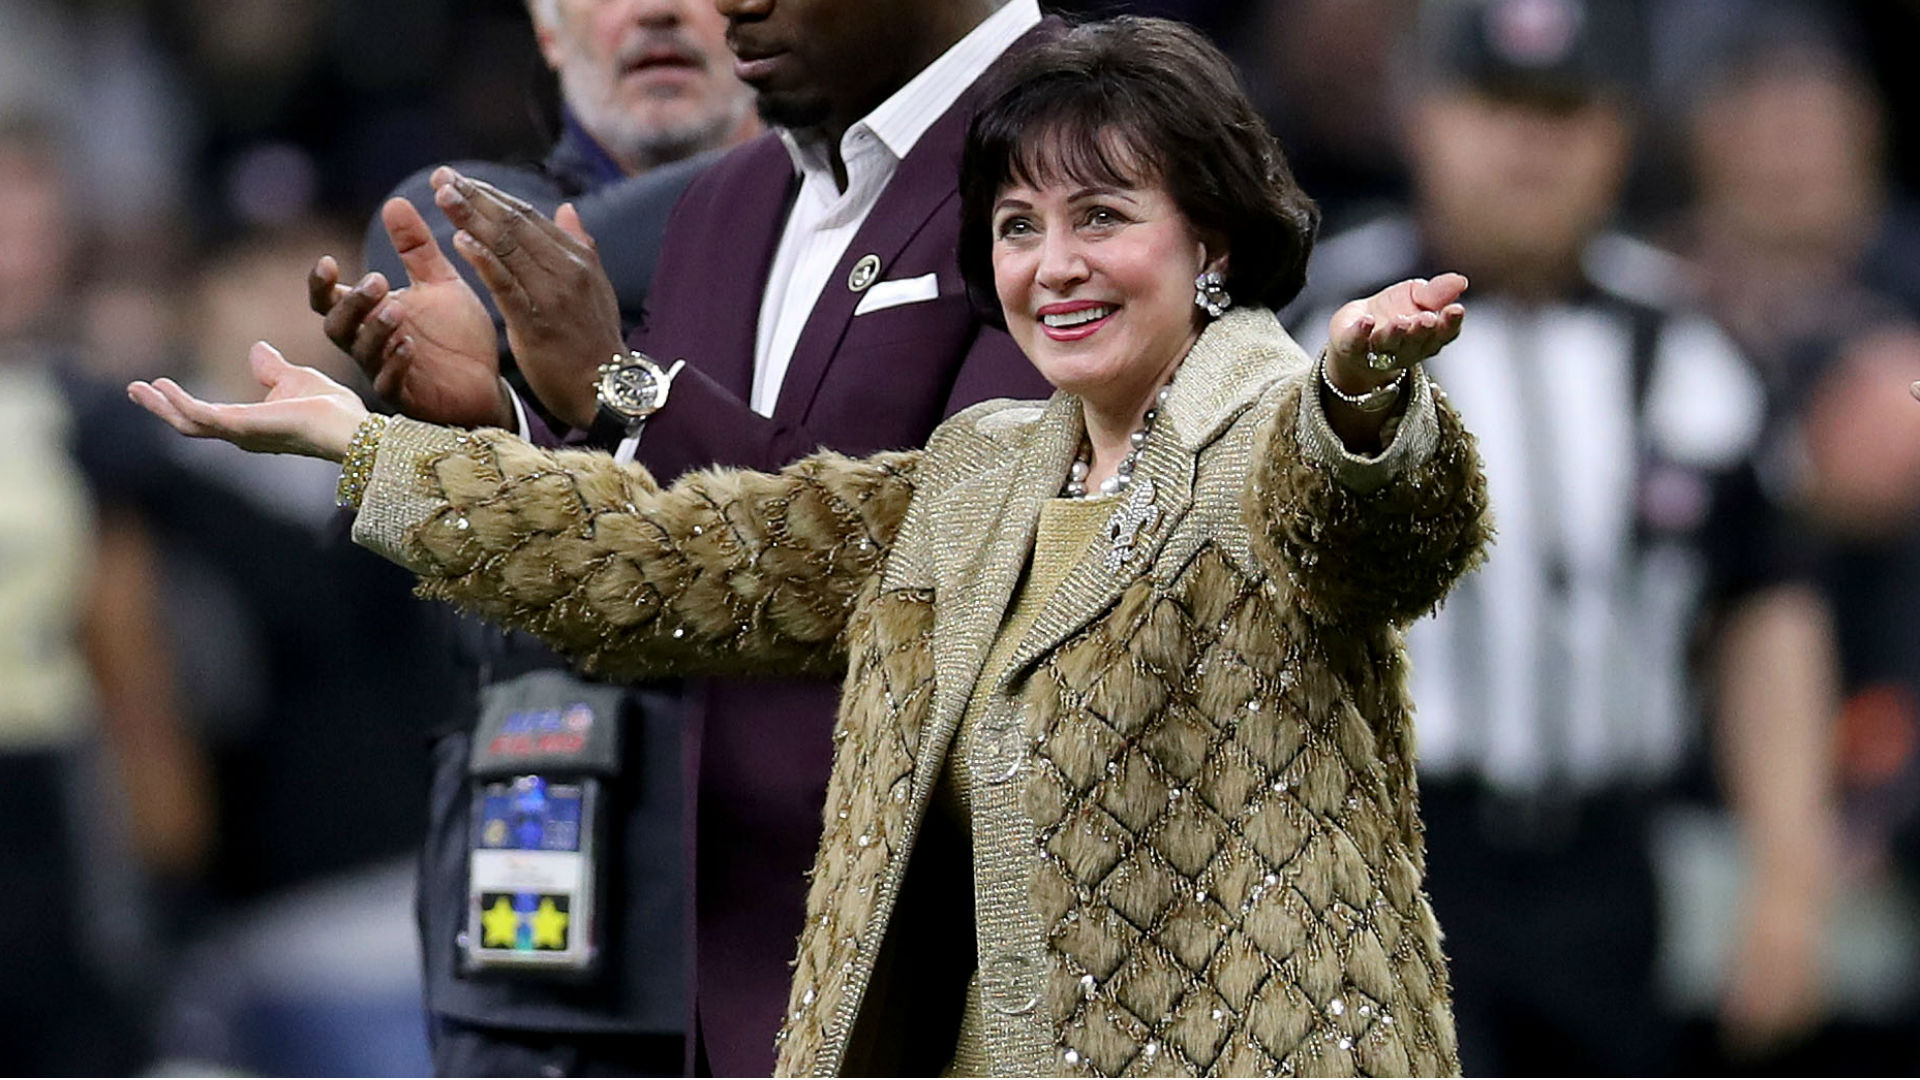 NFL playoffs 2019: Saints owner Gayle Benson says she'll 'aggressively pursue changes in NFL policies'